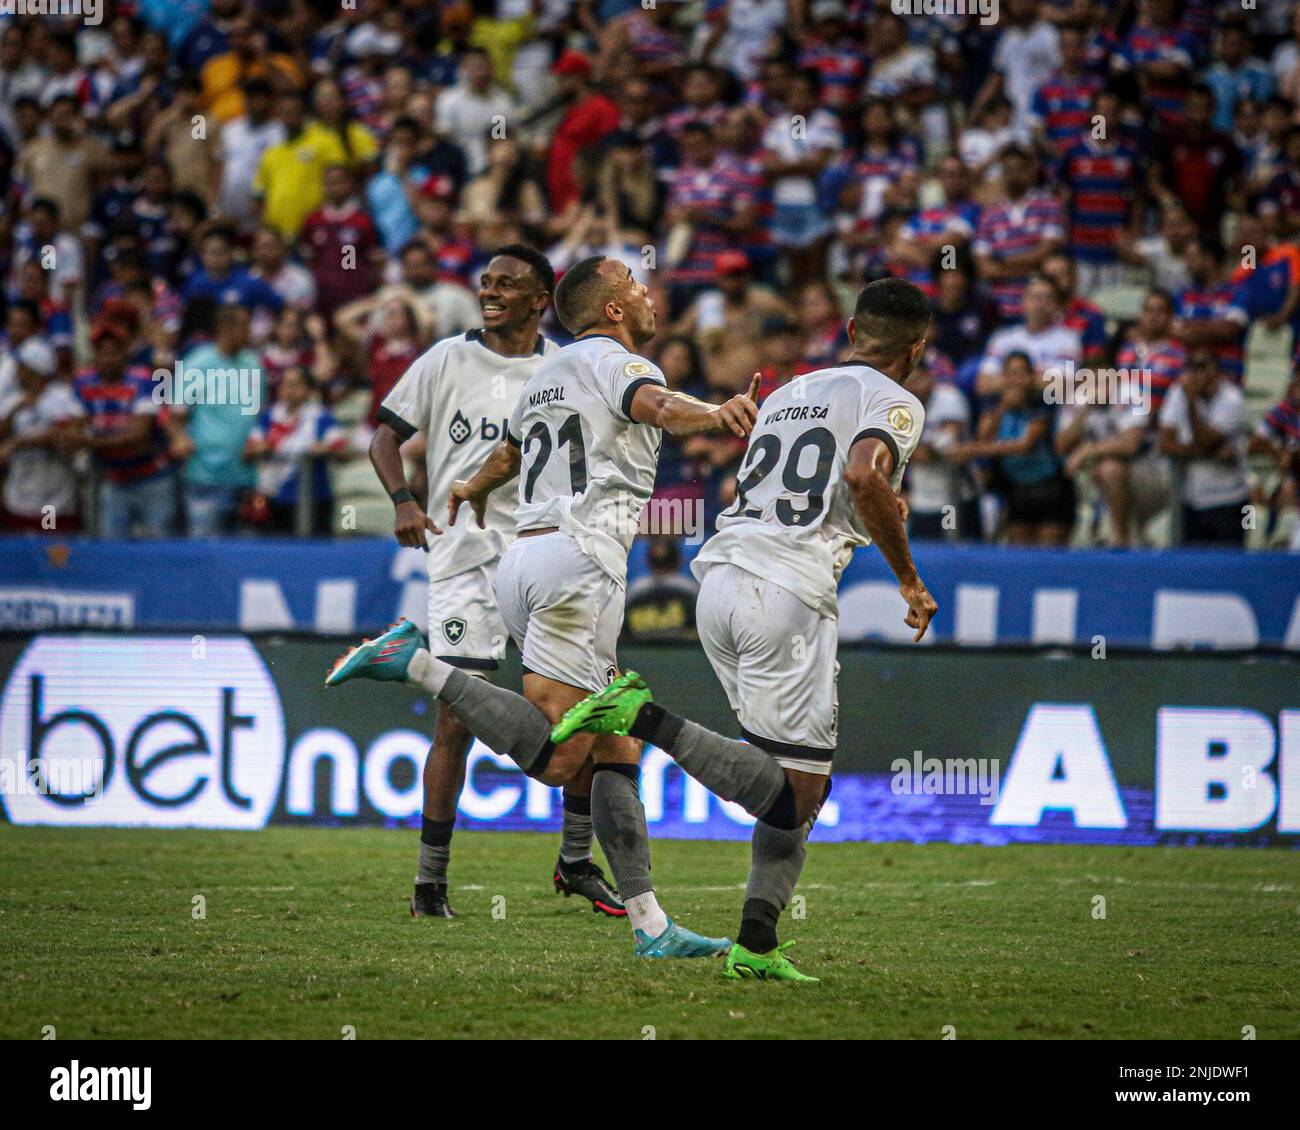 CE - Fortaleza - 09/04/2022 - BRAZILIAN A 2022, FORTALEZA X BOTAFOGO -  Marccal player from Fortaleza celebrates his goal during a match against  Botafogo at the Arena Castelao stadium for the